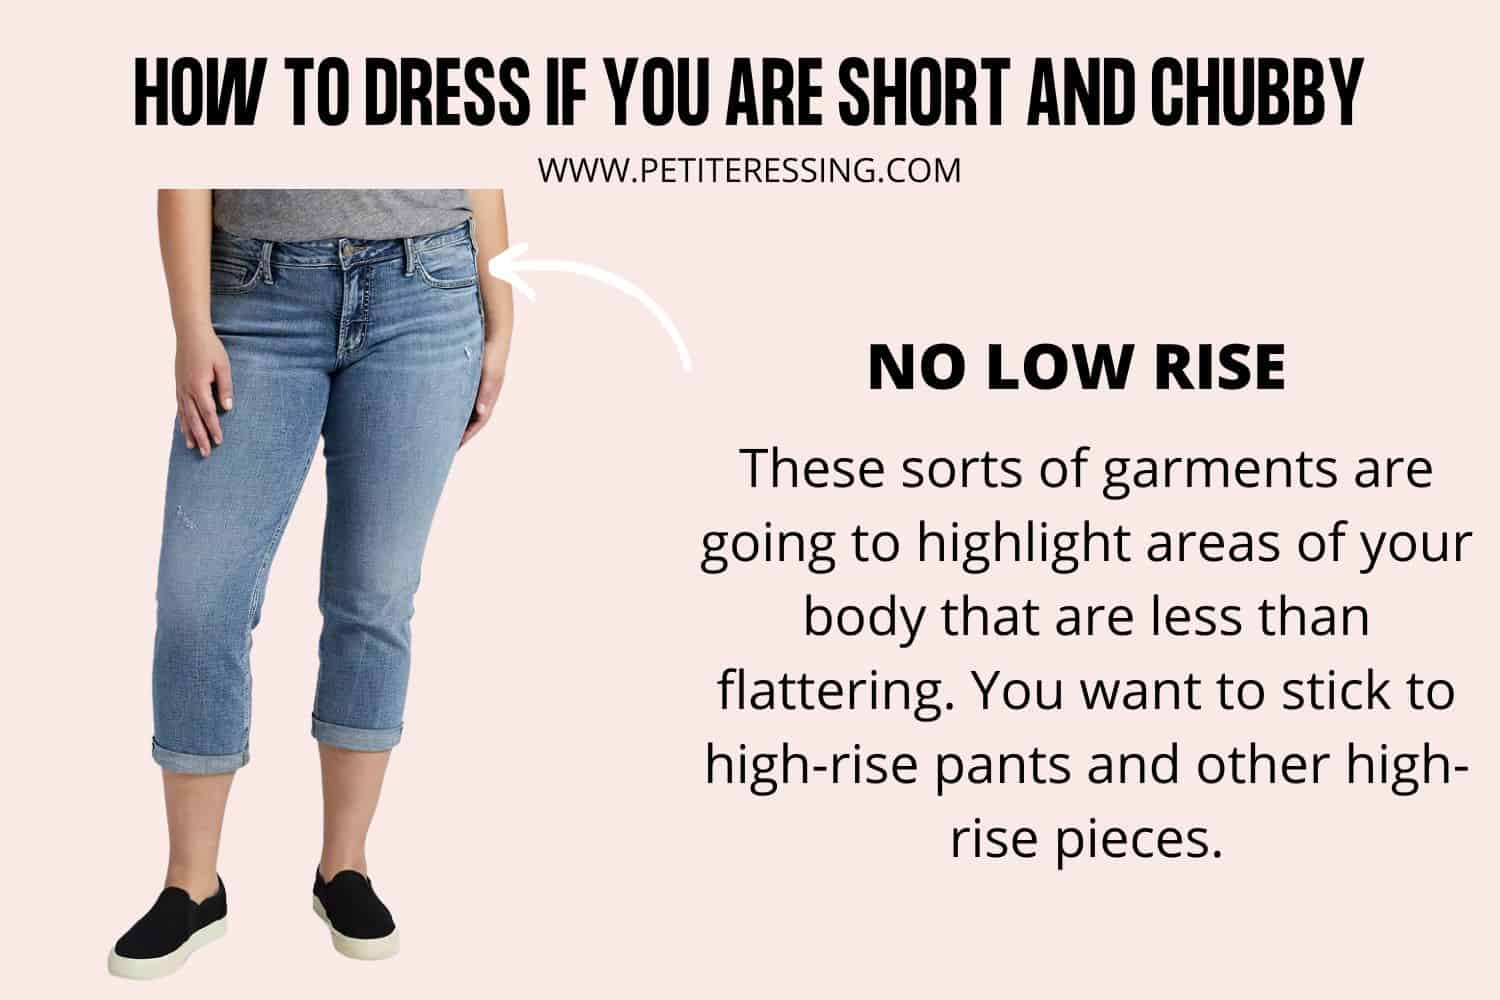 HOW-TO-DRESS-SHORT-AND-CHUBBY5